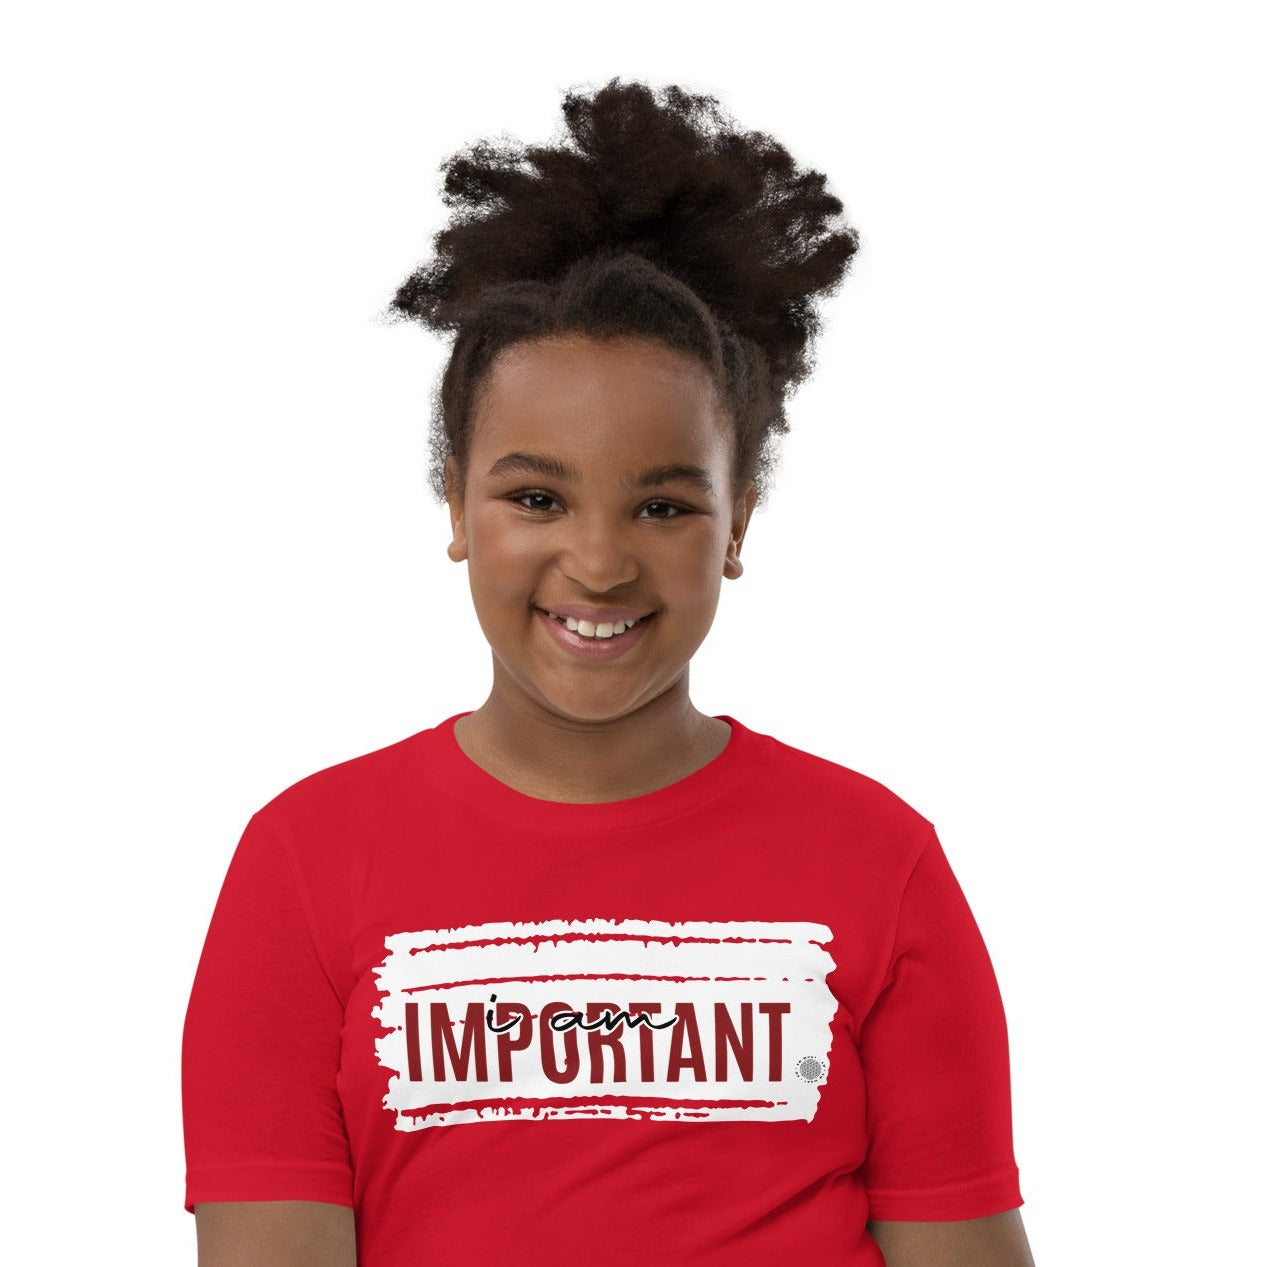 Our ‘I Am Important’ affirmation youth t-shirt describes your son or daughter who stands out when he or she enters the room. They are the center of attention and want everyone to know so. Your child is the most important person in any room.